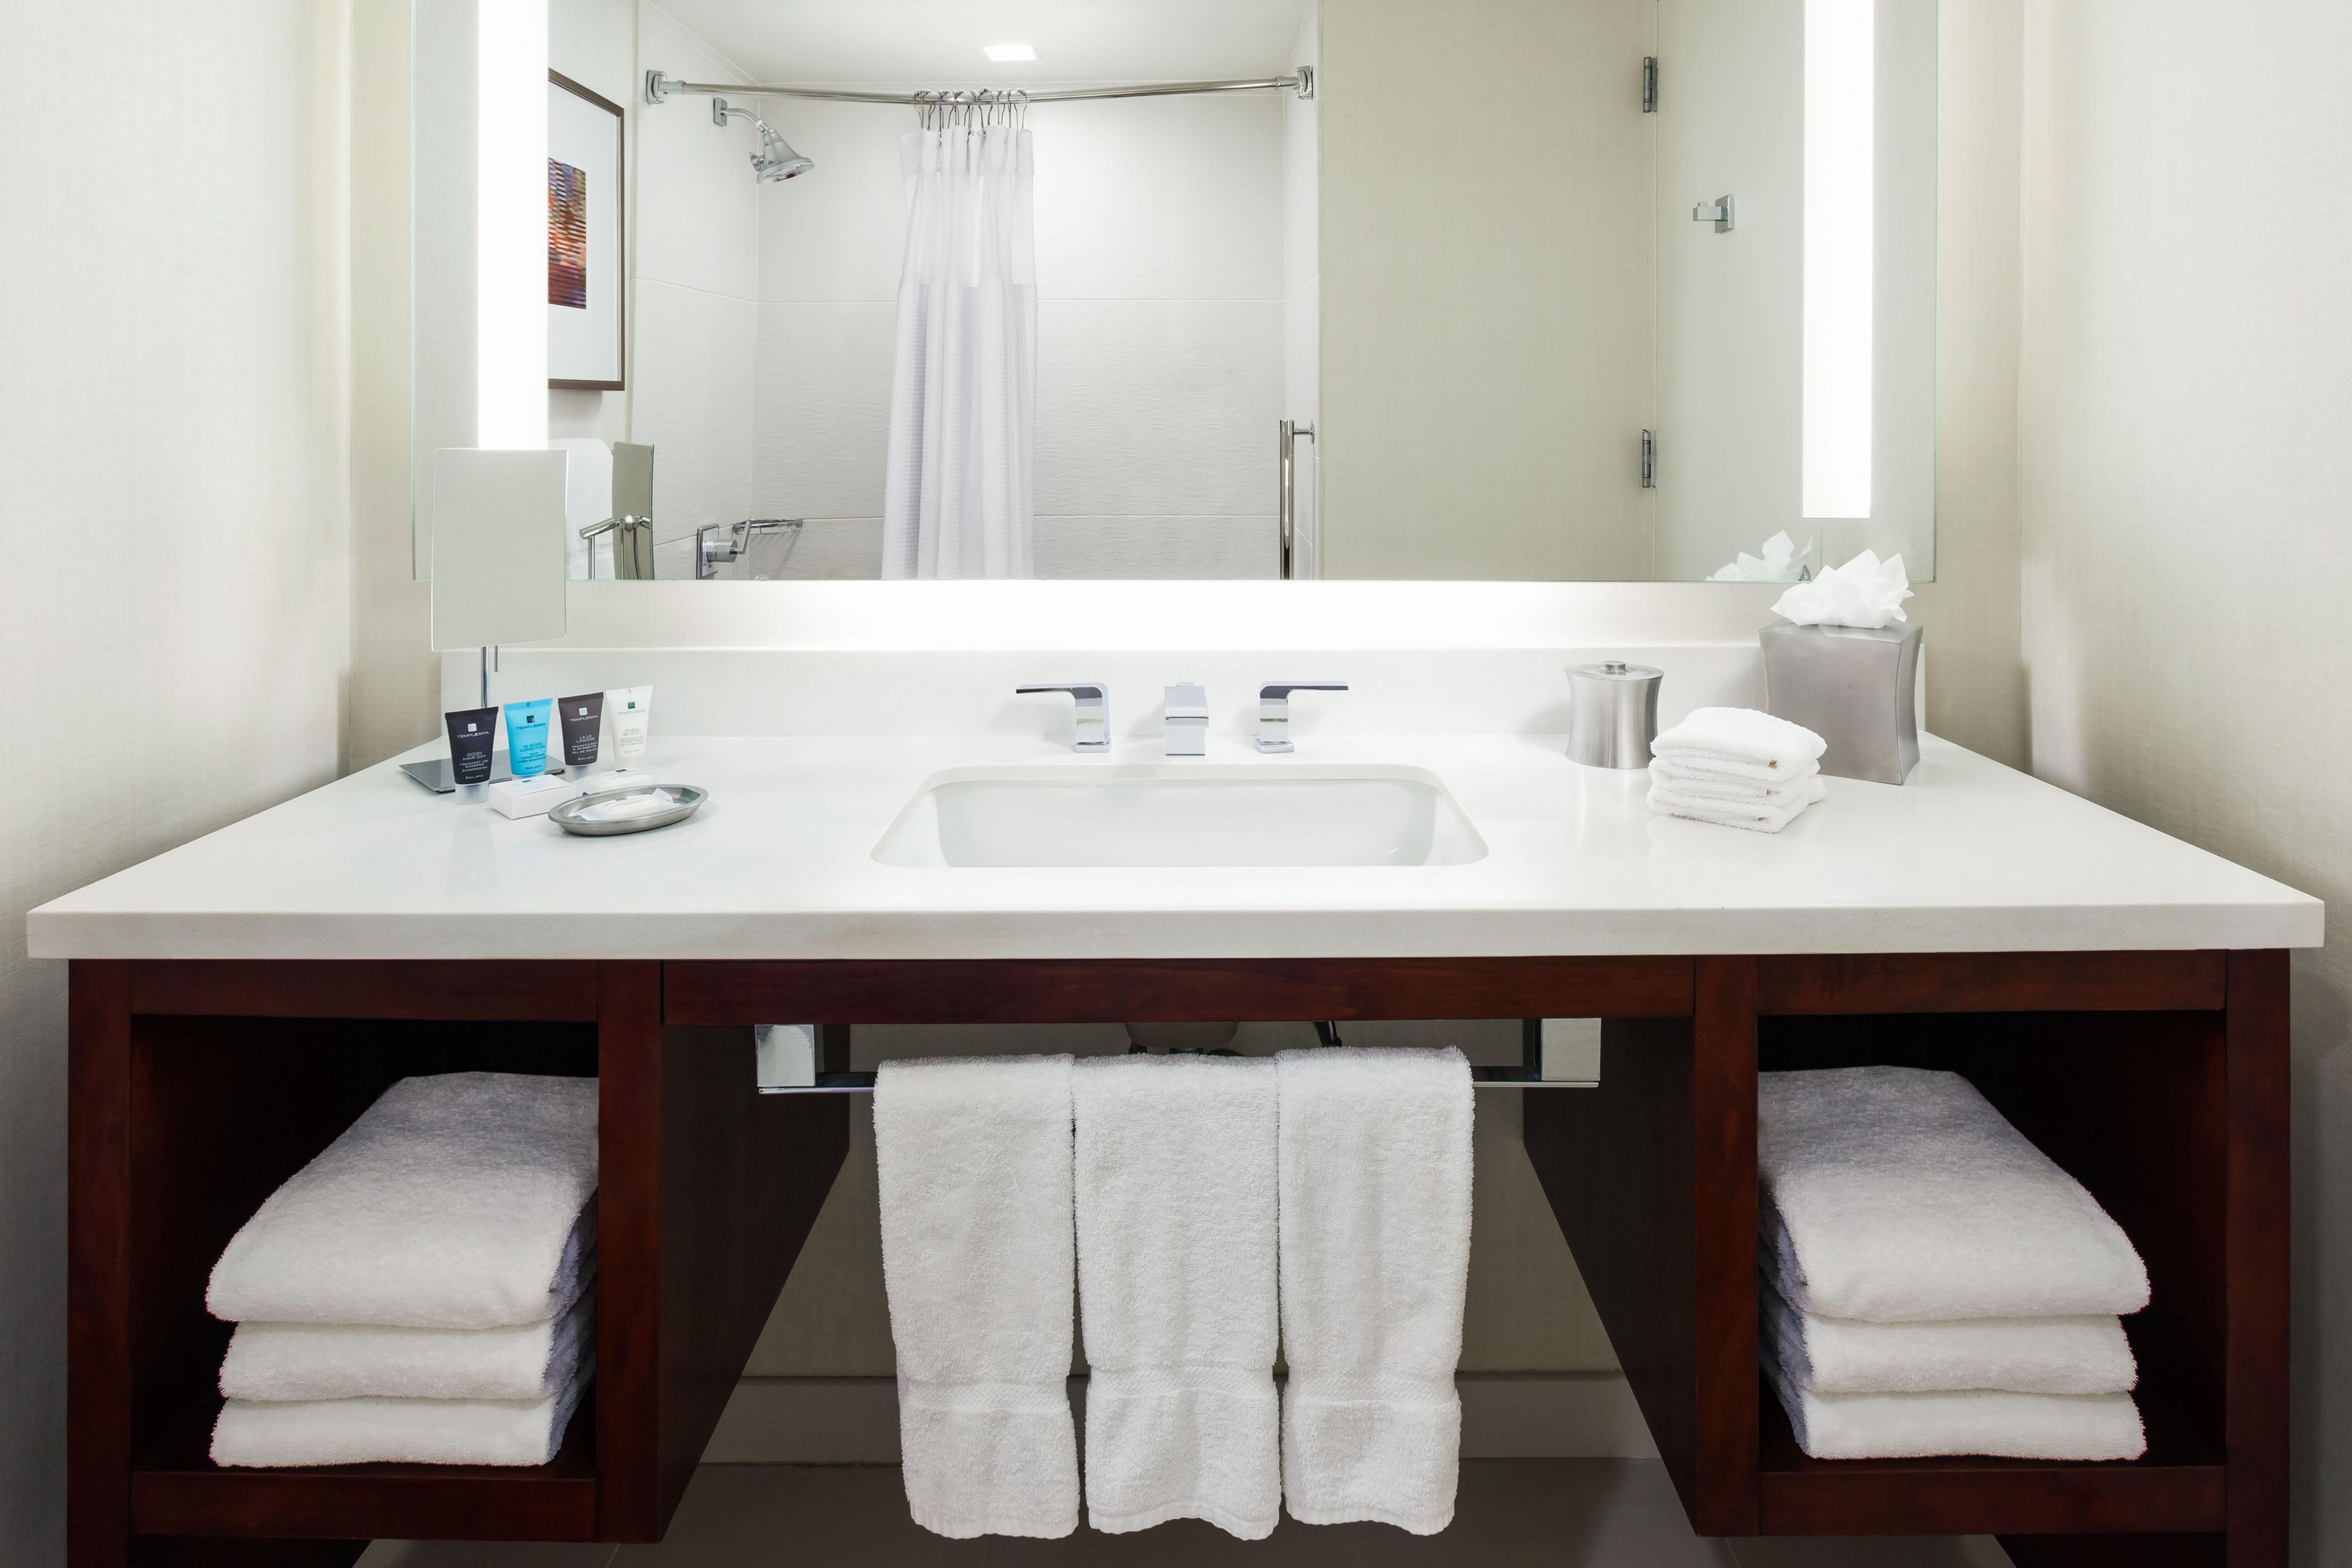 Spacious and updated vanities in all bathrooms